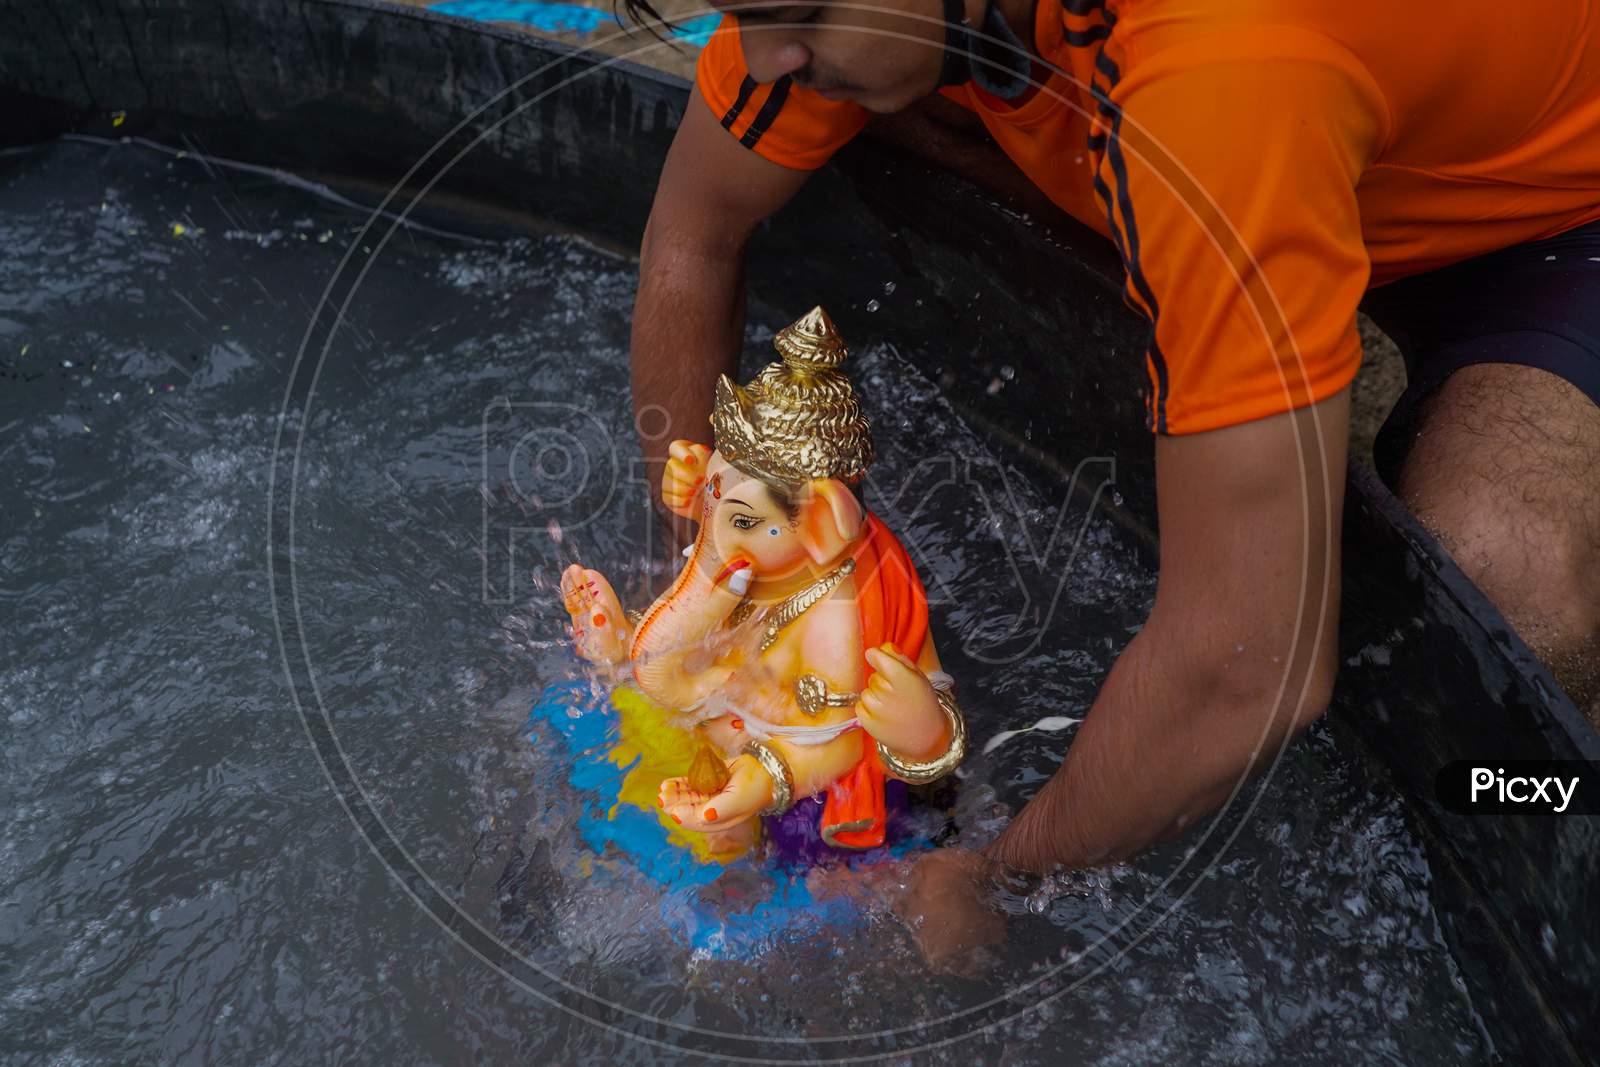 Ganesh idol immersion in covid 19 pandemic restrictions. Ganpati Visarjan In Man Made pond People With Mask